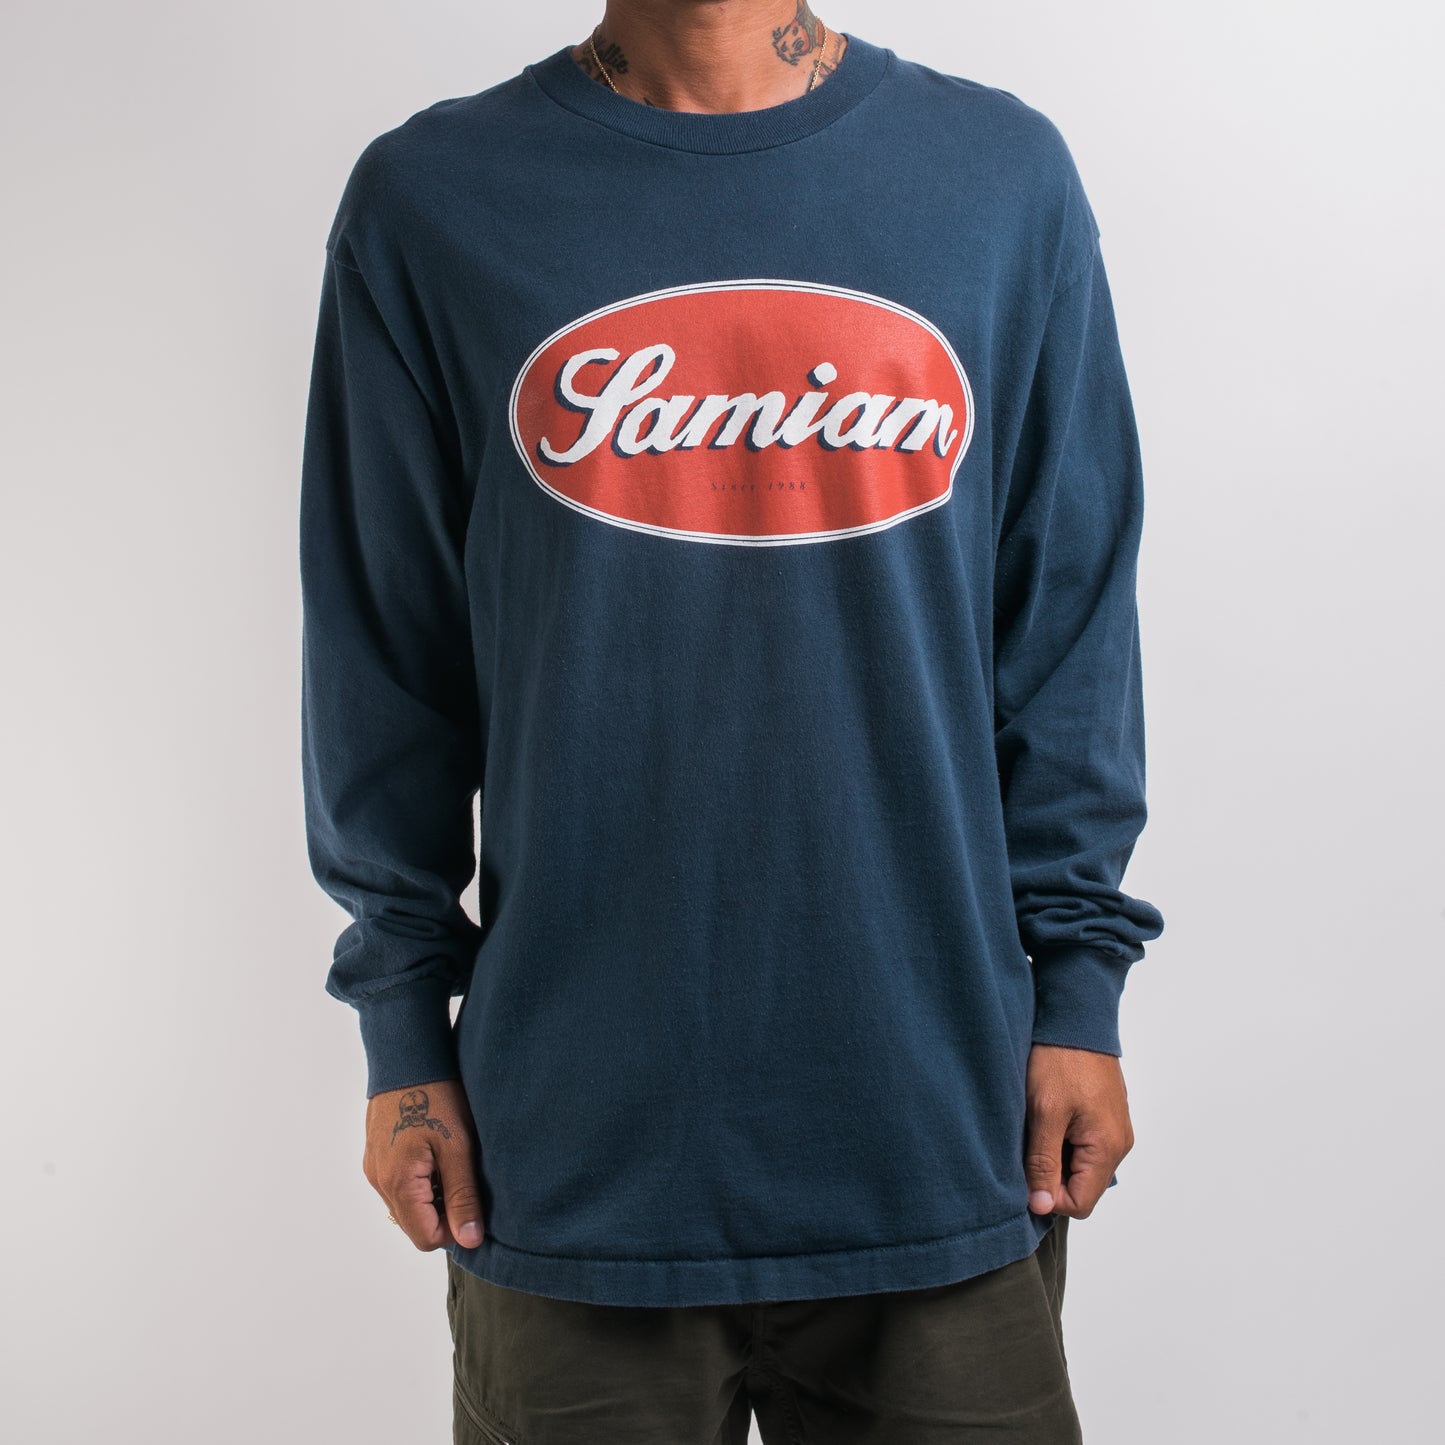 Vintage 90’s Samiam Clumsy Longsleeve